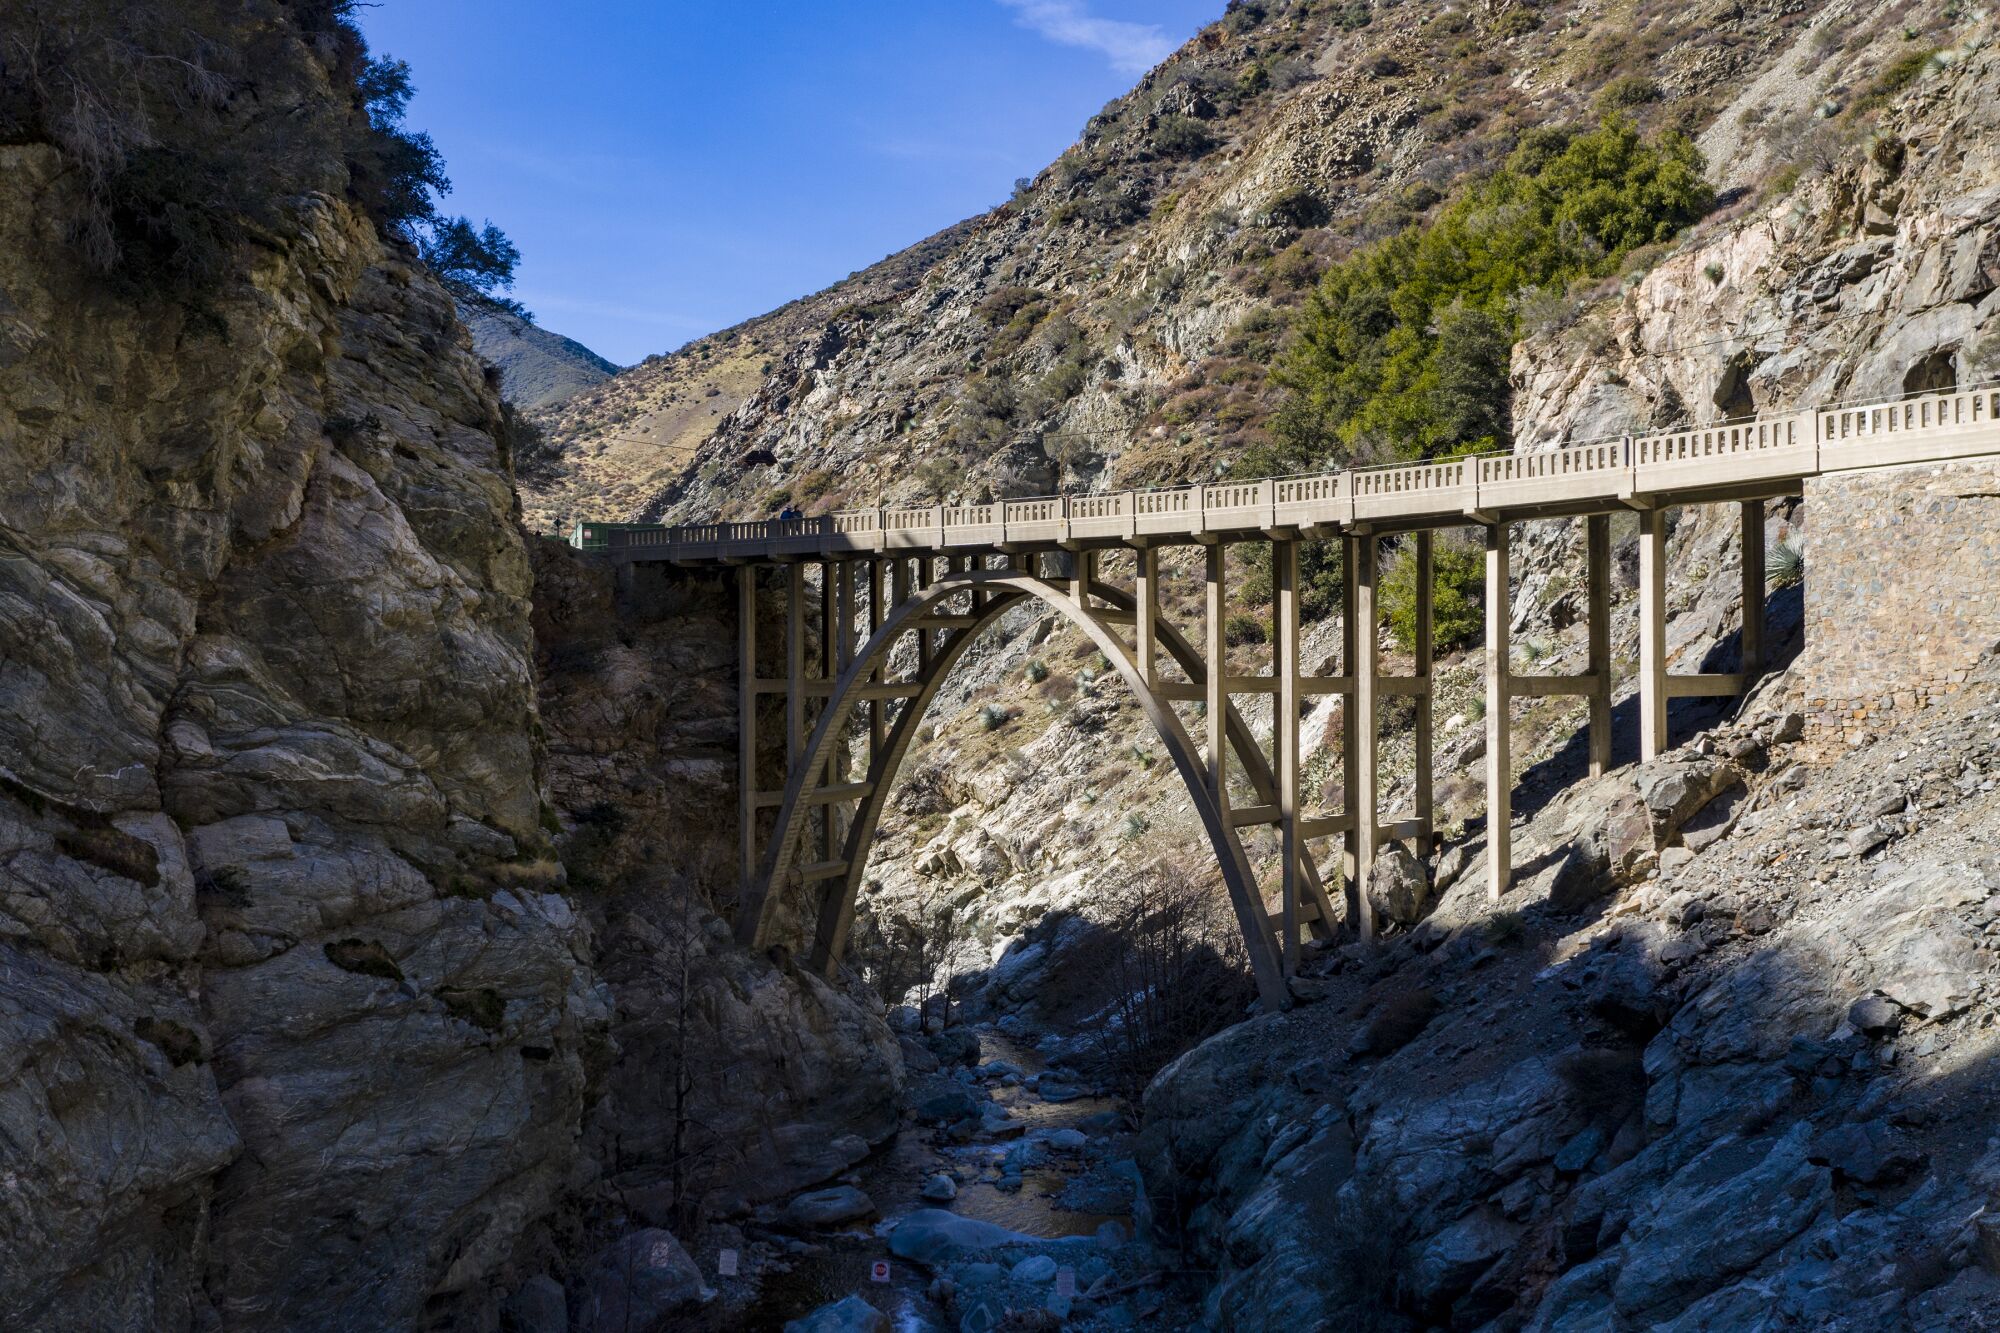 The Bridge to Nowhere crosses the East Fork of the San Gabriel River.